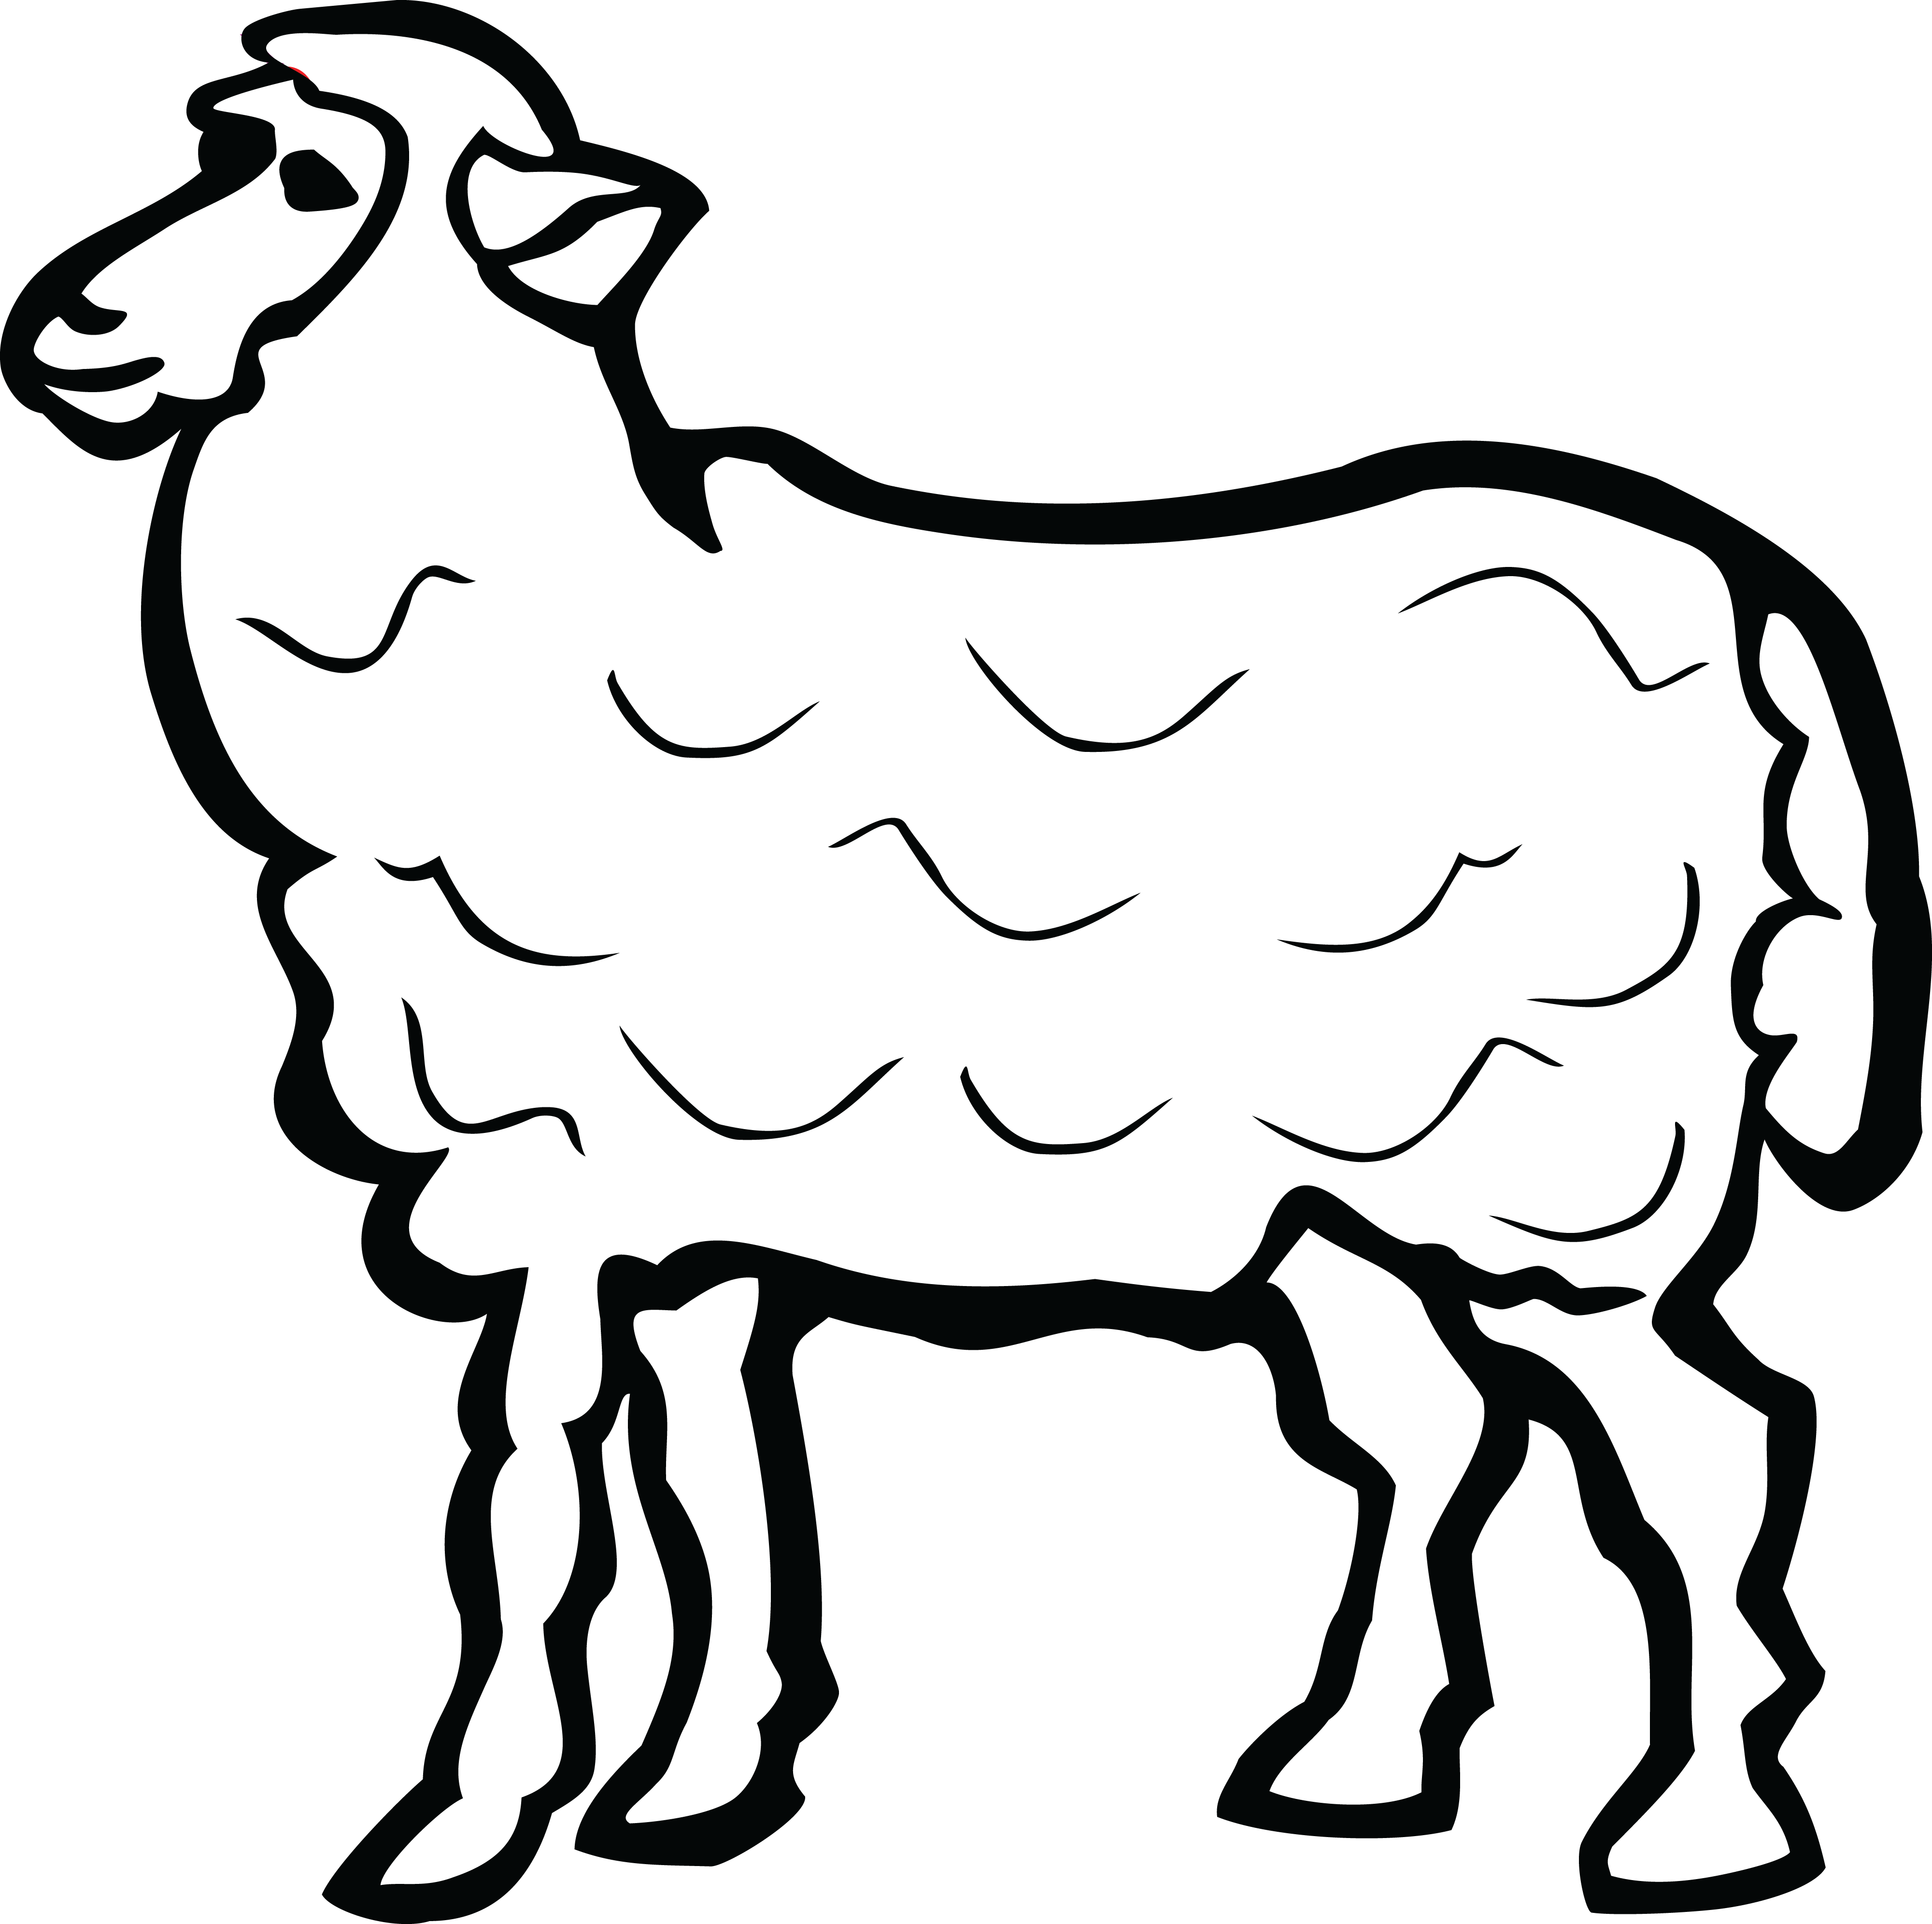 Free Clipart Of A Lamb - Sheep Black And White Clipart Jpeg.